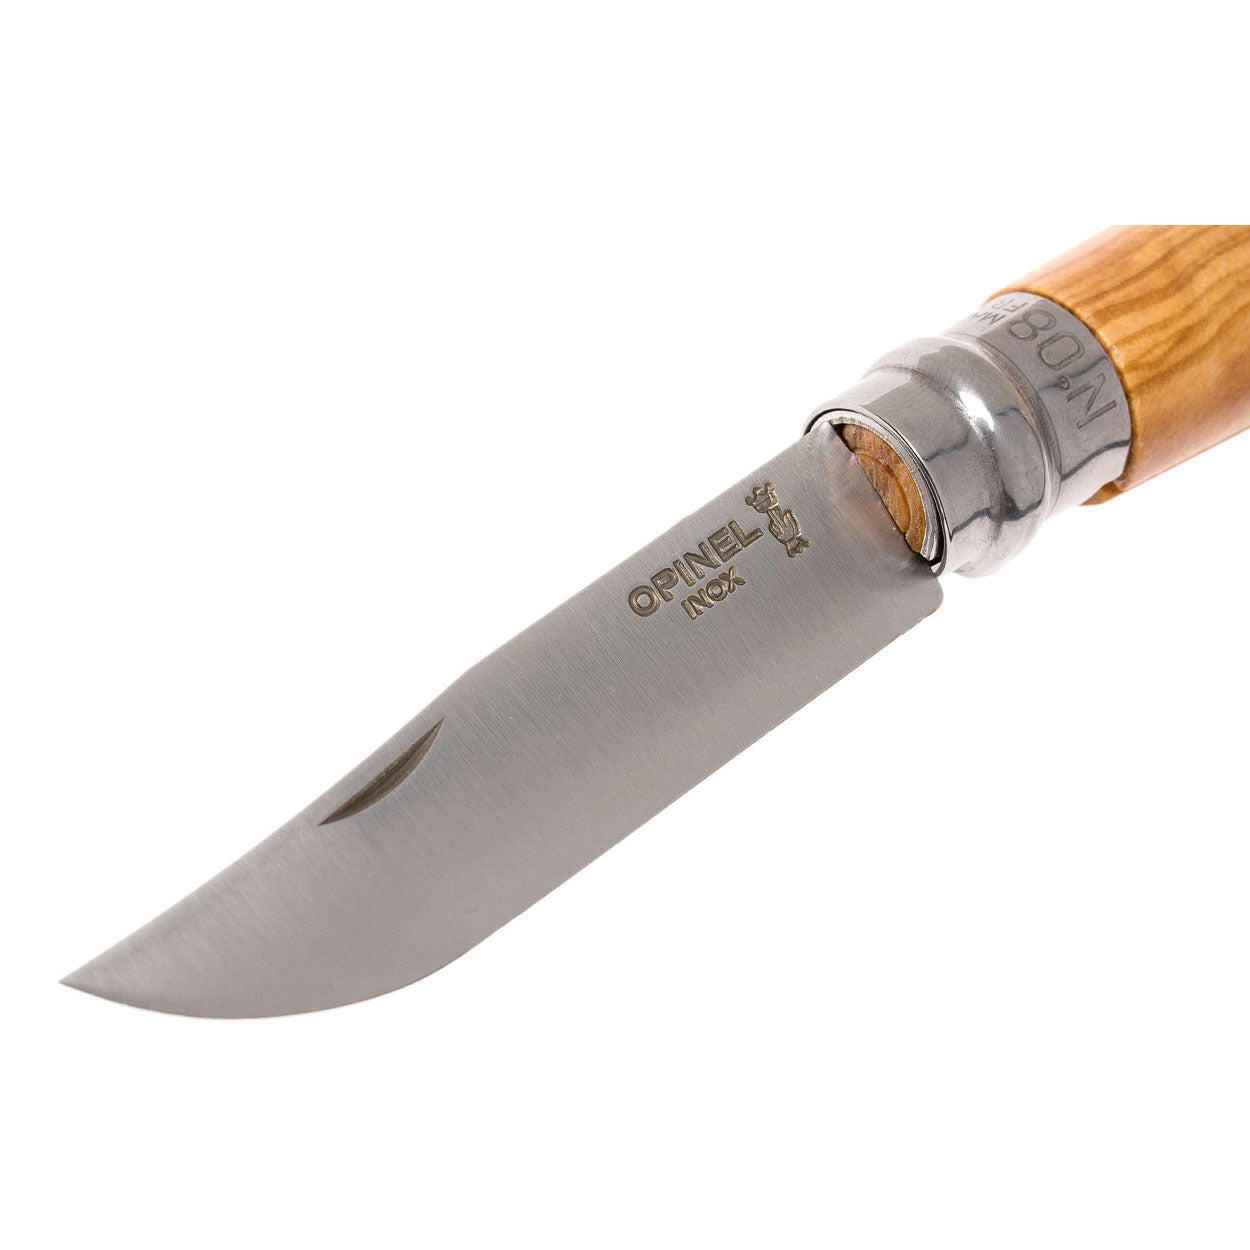 Opinel zakmes olijfhout N°08 met – Uncover Lab